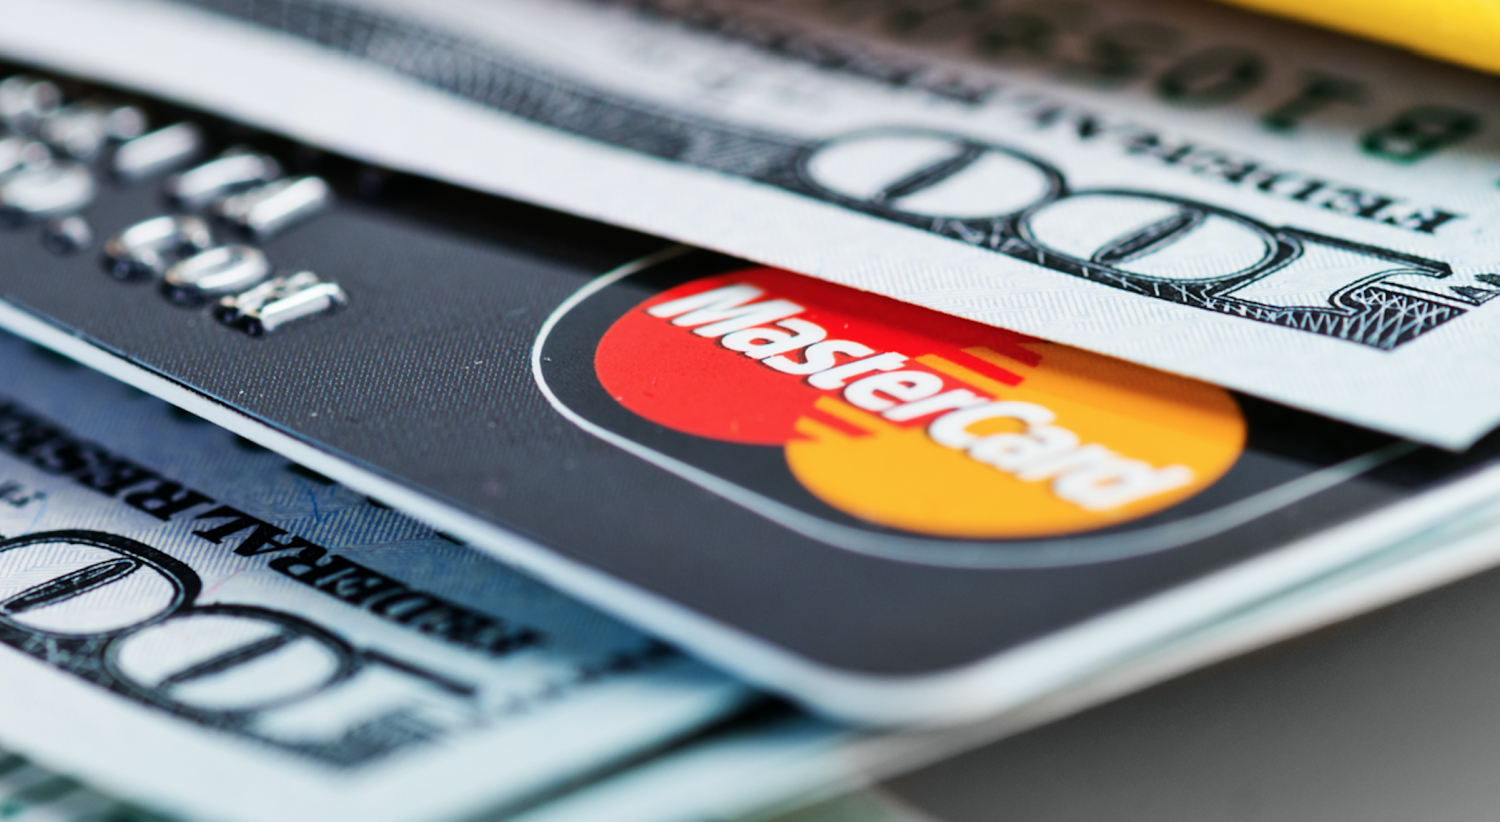 Credit Card Giant MasterCard Releases 'Experimental' Blockchain APIs